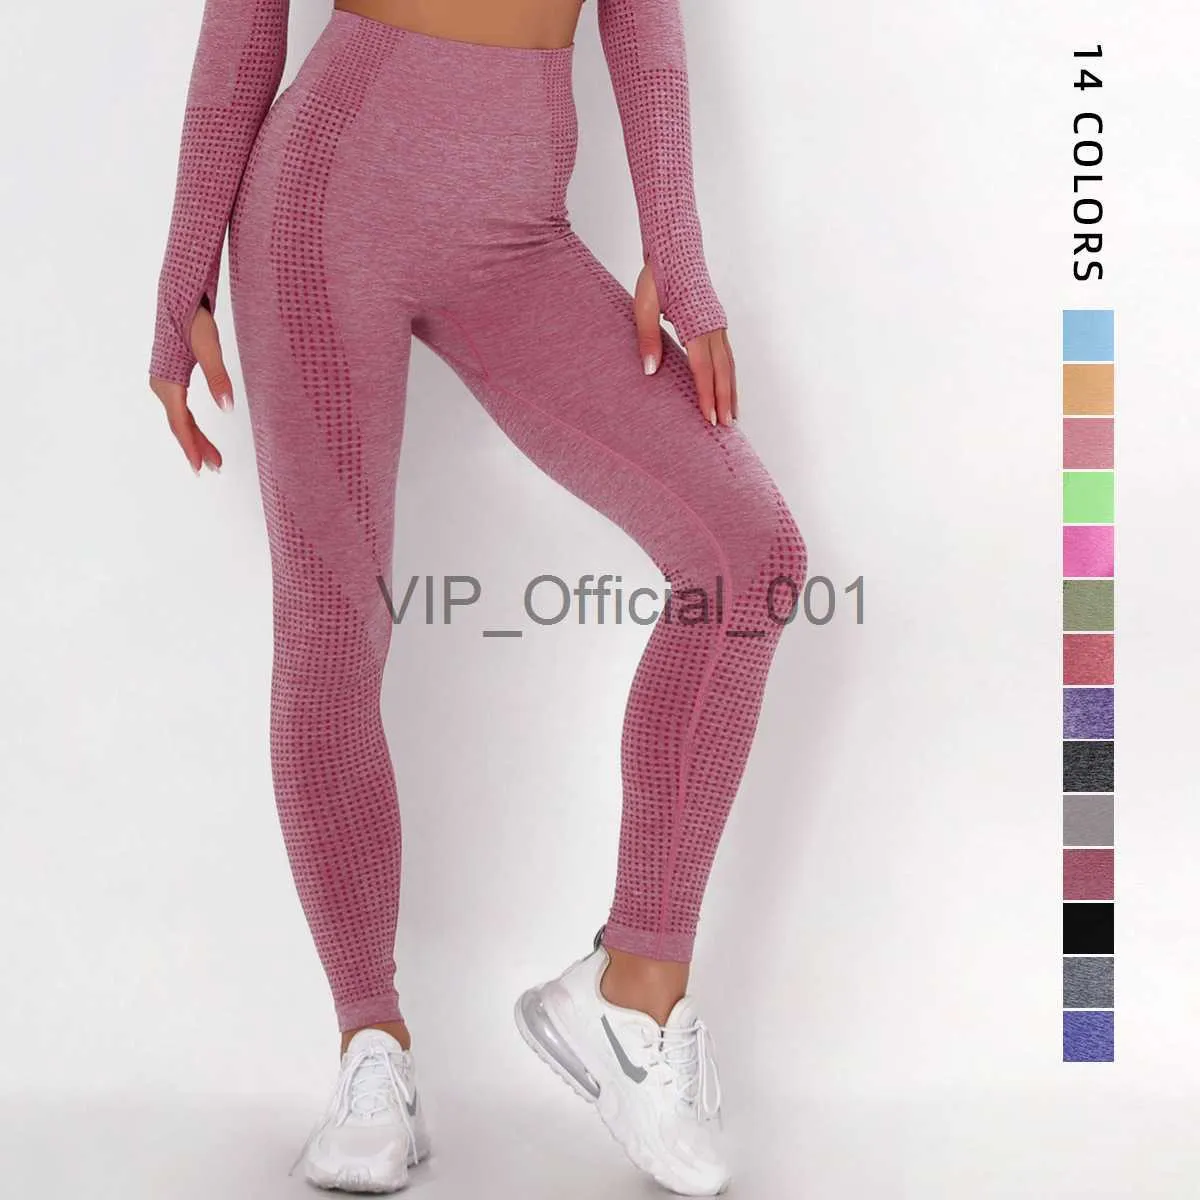 High Waist Seamless Smiley Cotton Spandex Yoga Pants For Women 2022  Collection From Vip_official_001, $4.62